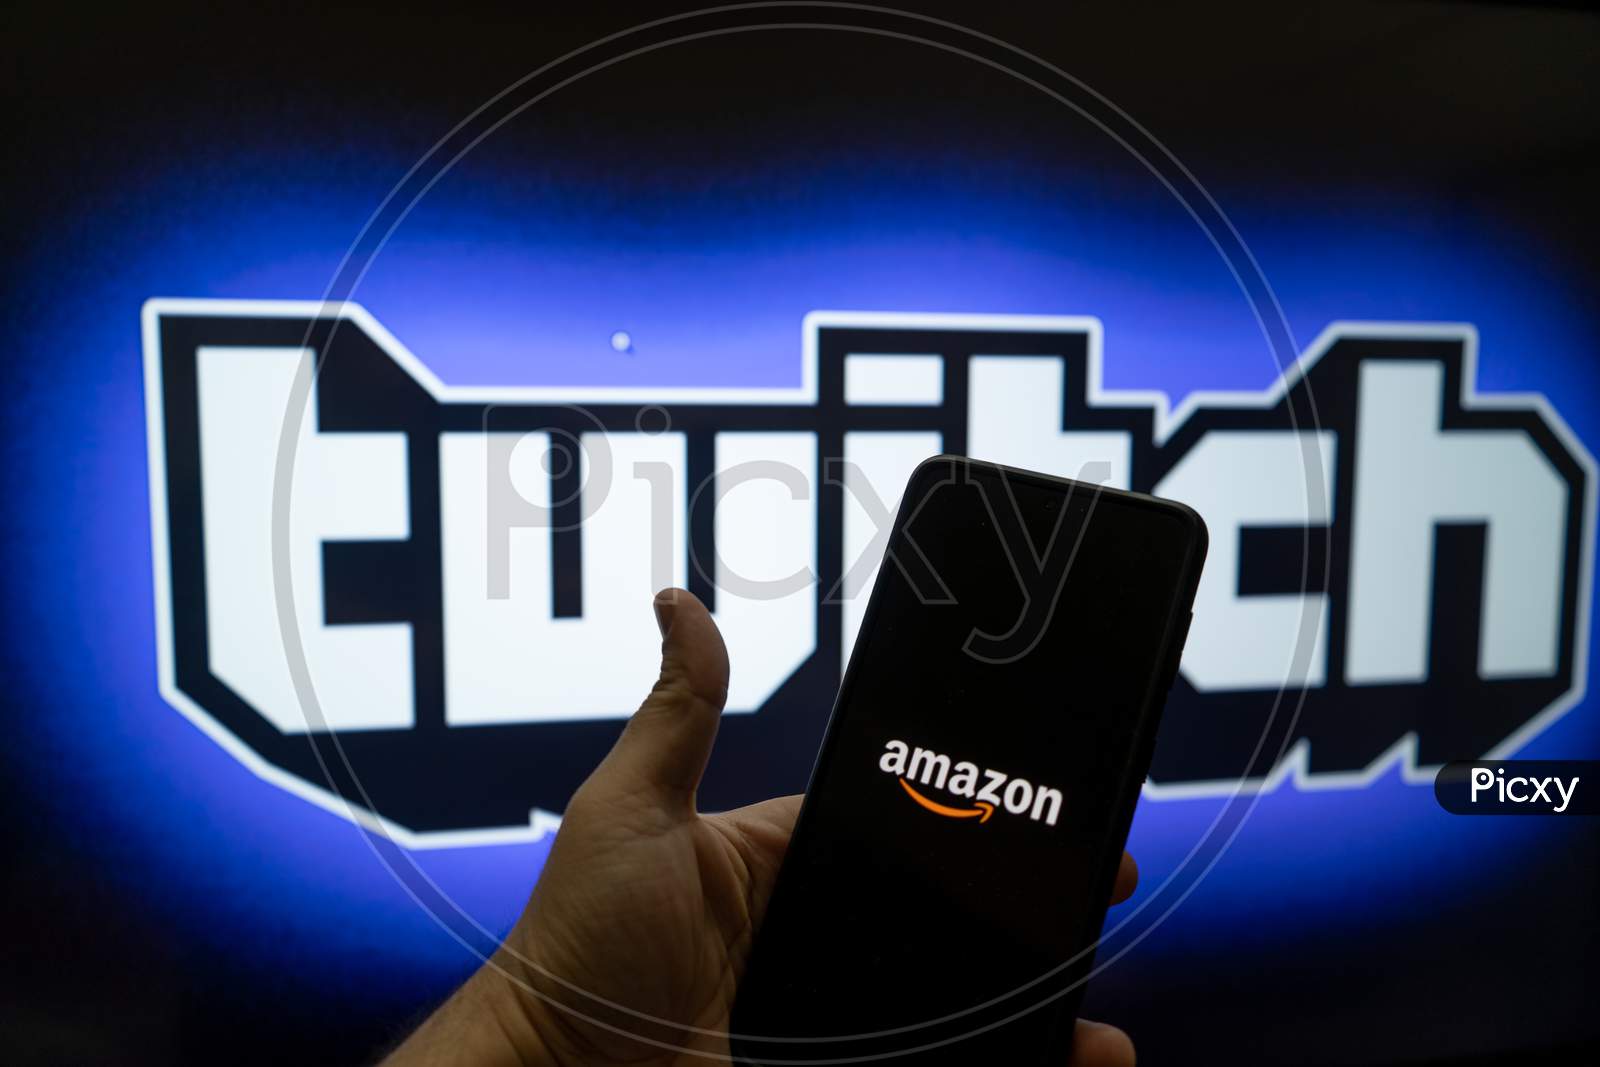 Man Holding Mobile Phone With Amazon Logo And Twitch Streaming Platform Name And Logo In The Background Showing This Platform With Full Time Earning Streamers